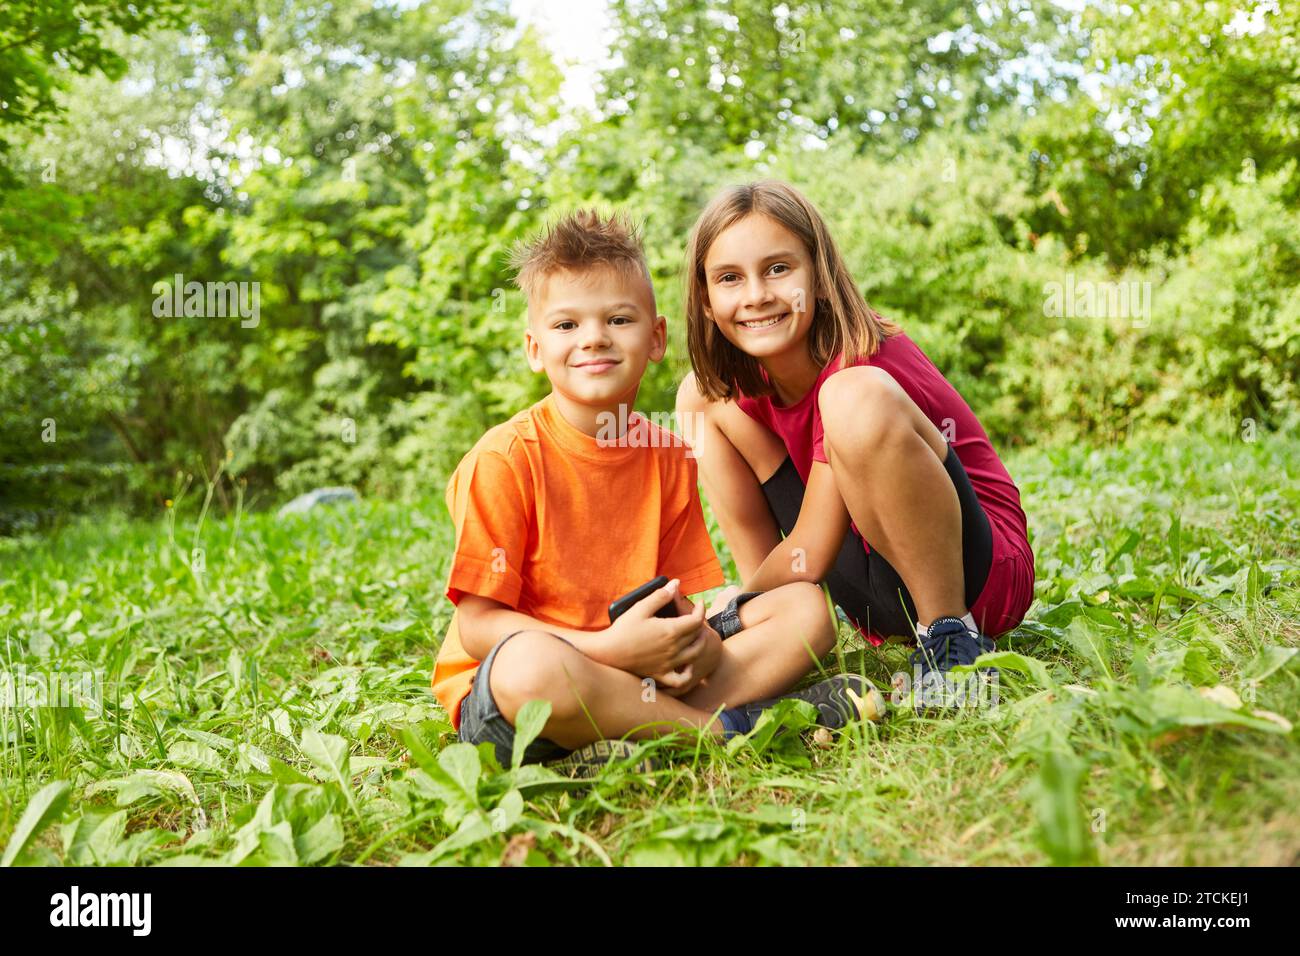 Portrait of smiling girl crouching next to boy sitting with smart phone at park Stock Photo